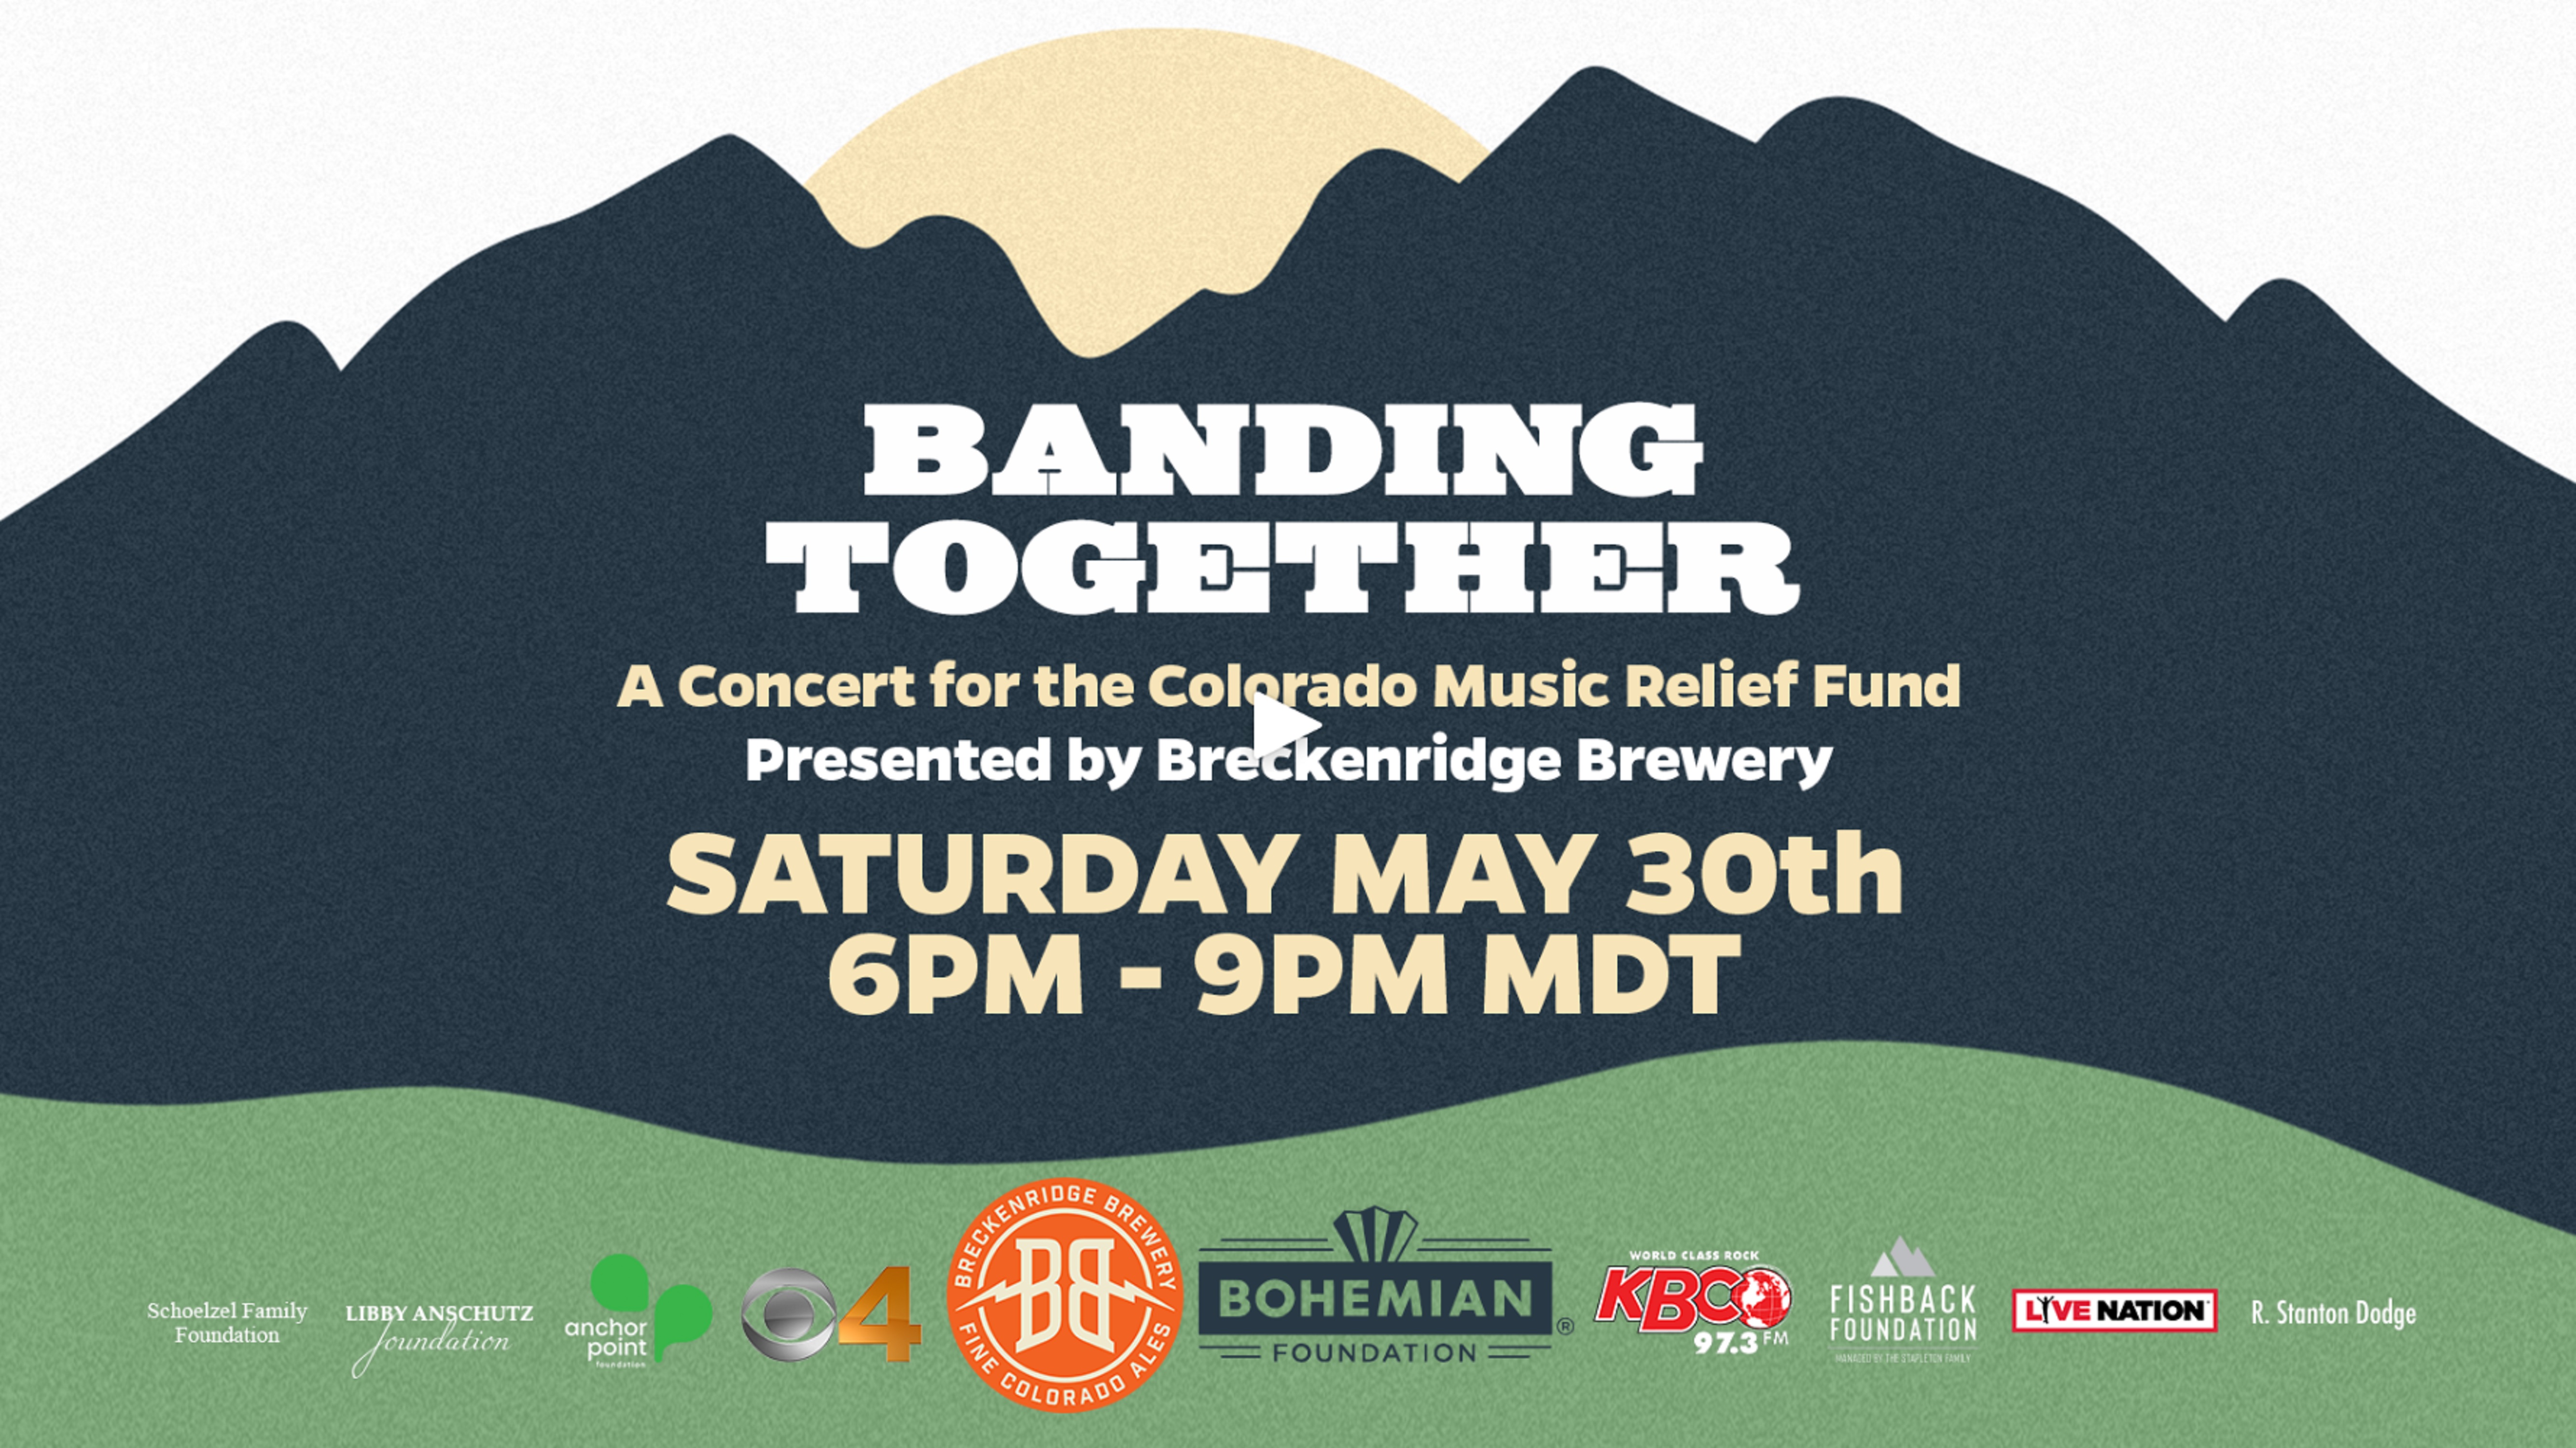 Colorado Music Relief Fund Raises Over $625,000 with 'Banding Together' Concert